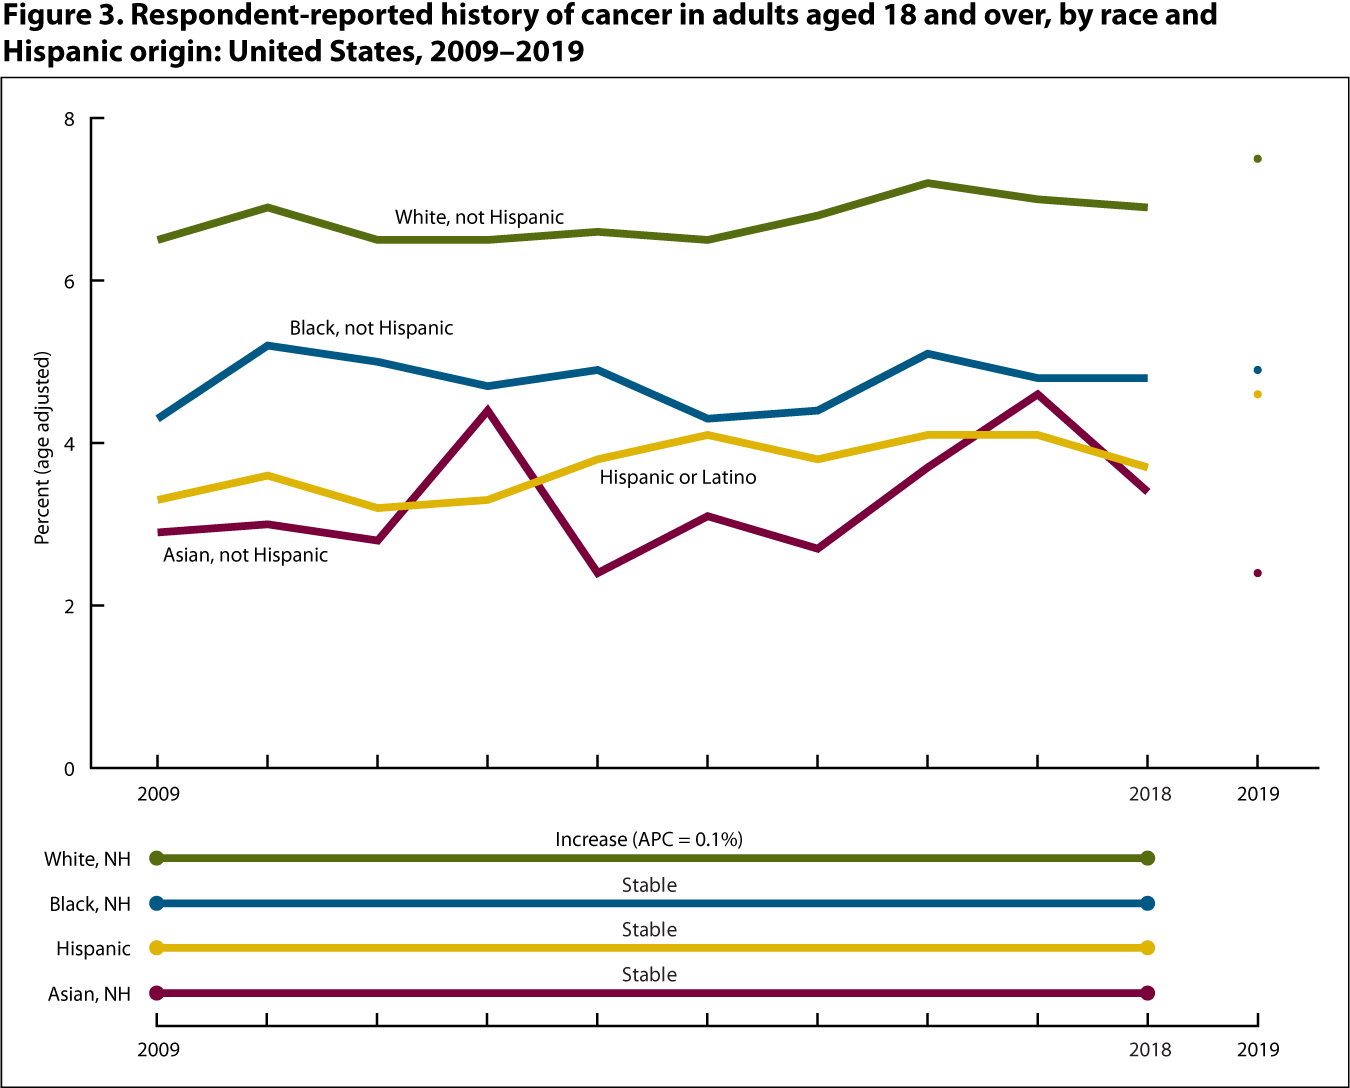 Figure 3 is a line graph showing the percentage of respondent-reported history of cancer among adults aged 18 and over, by race and Hispanic origin for 2009 through 2018 (line) and at 2019 (point).